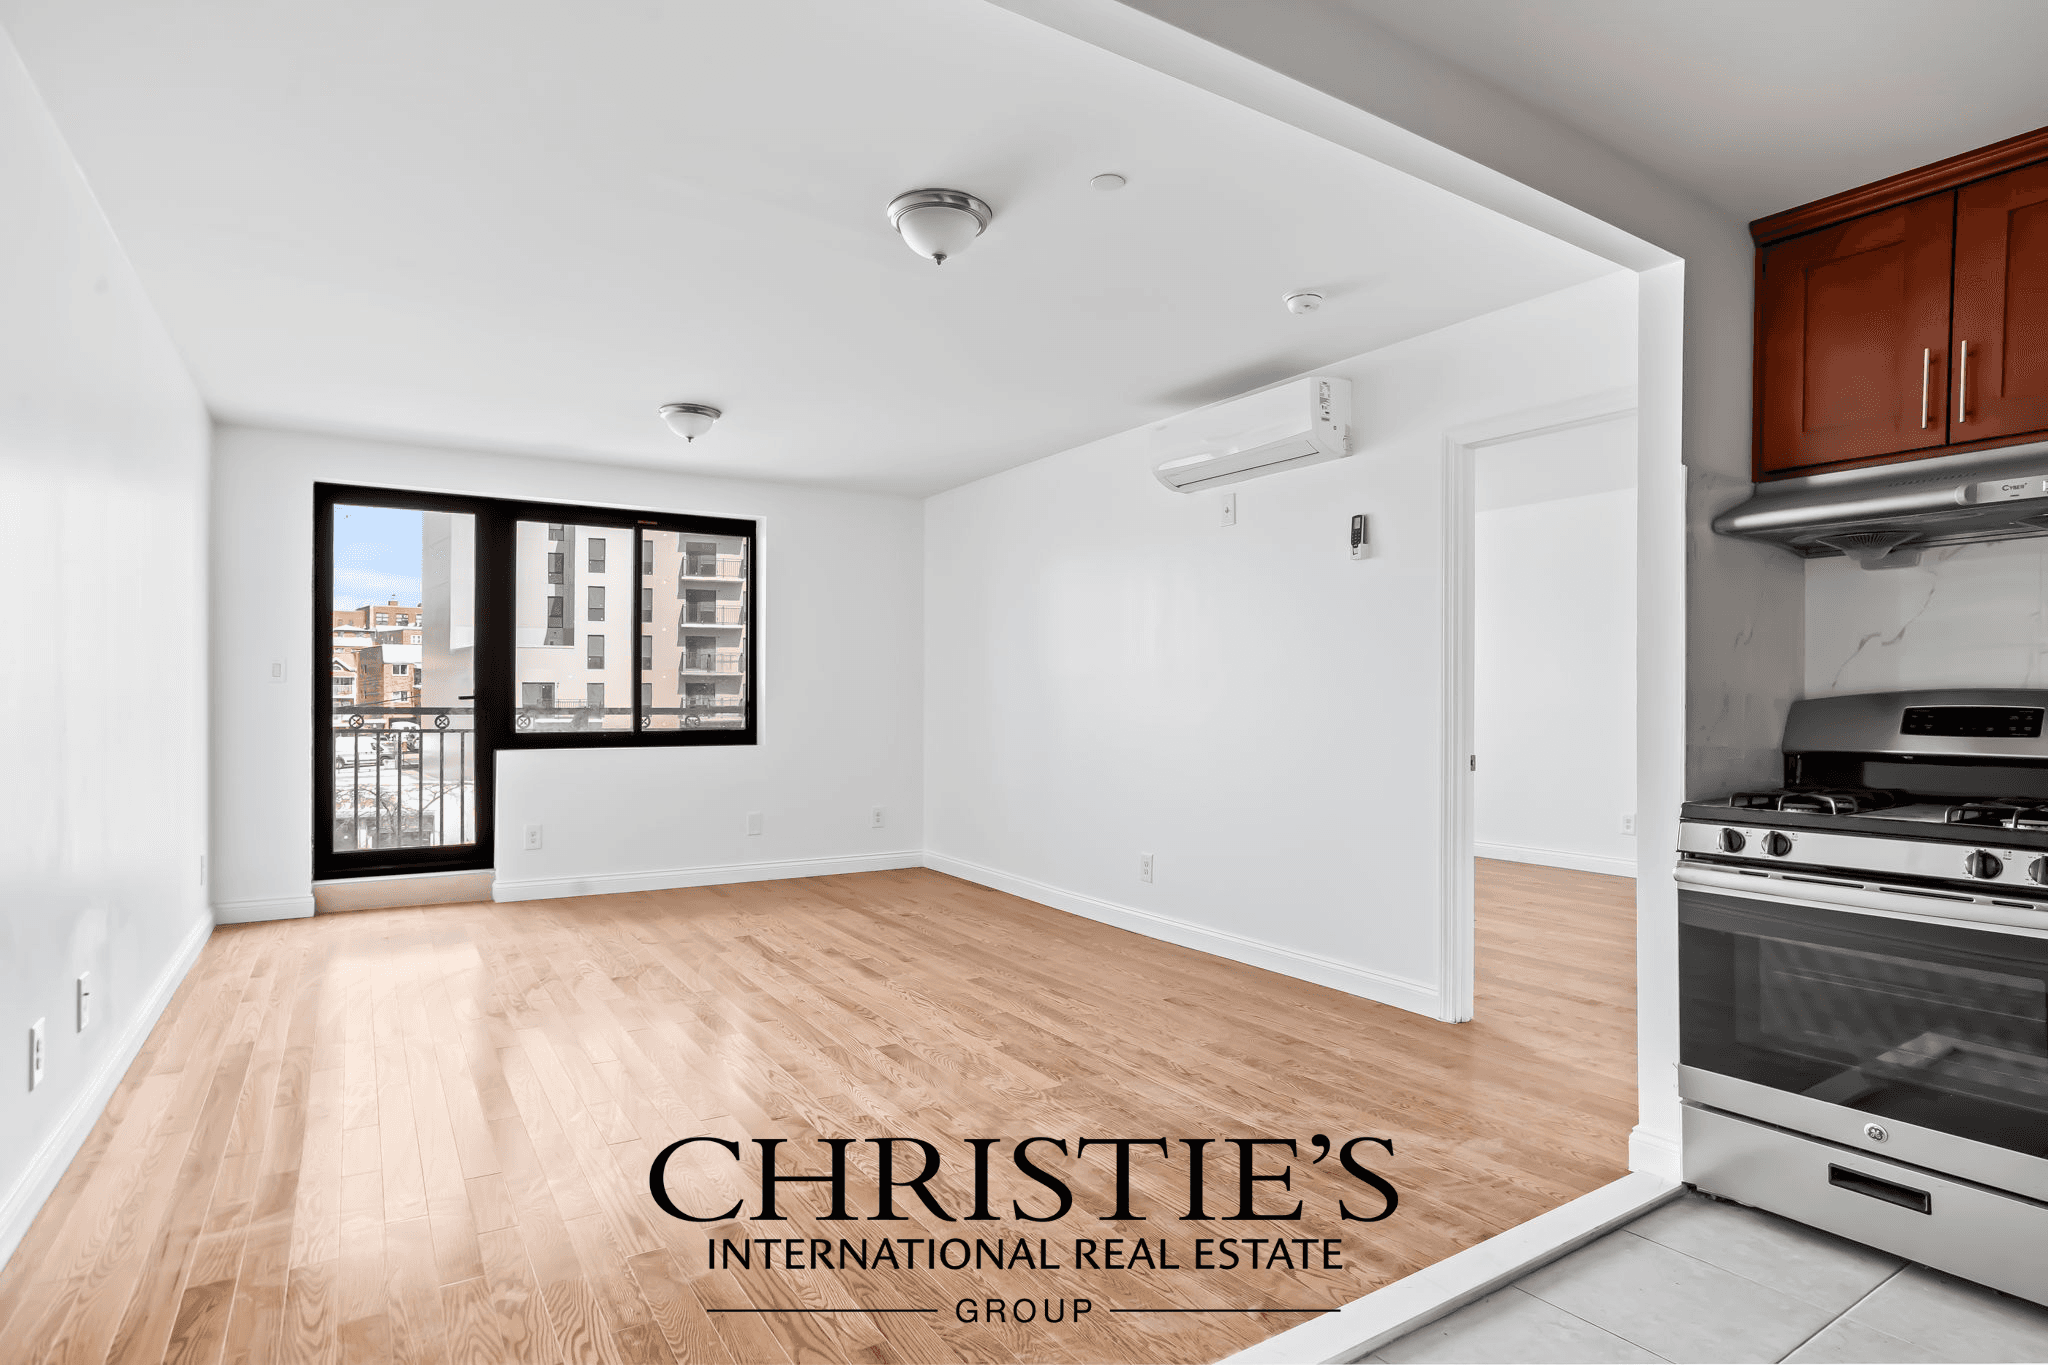 Step into the inviting comfort of this newly built 2 bedroom, 2 bathroom apartment located in the vibrant neighborhood of Woodside.